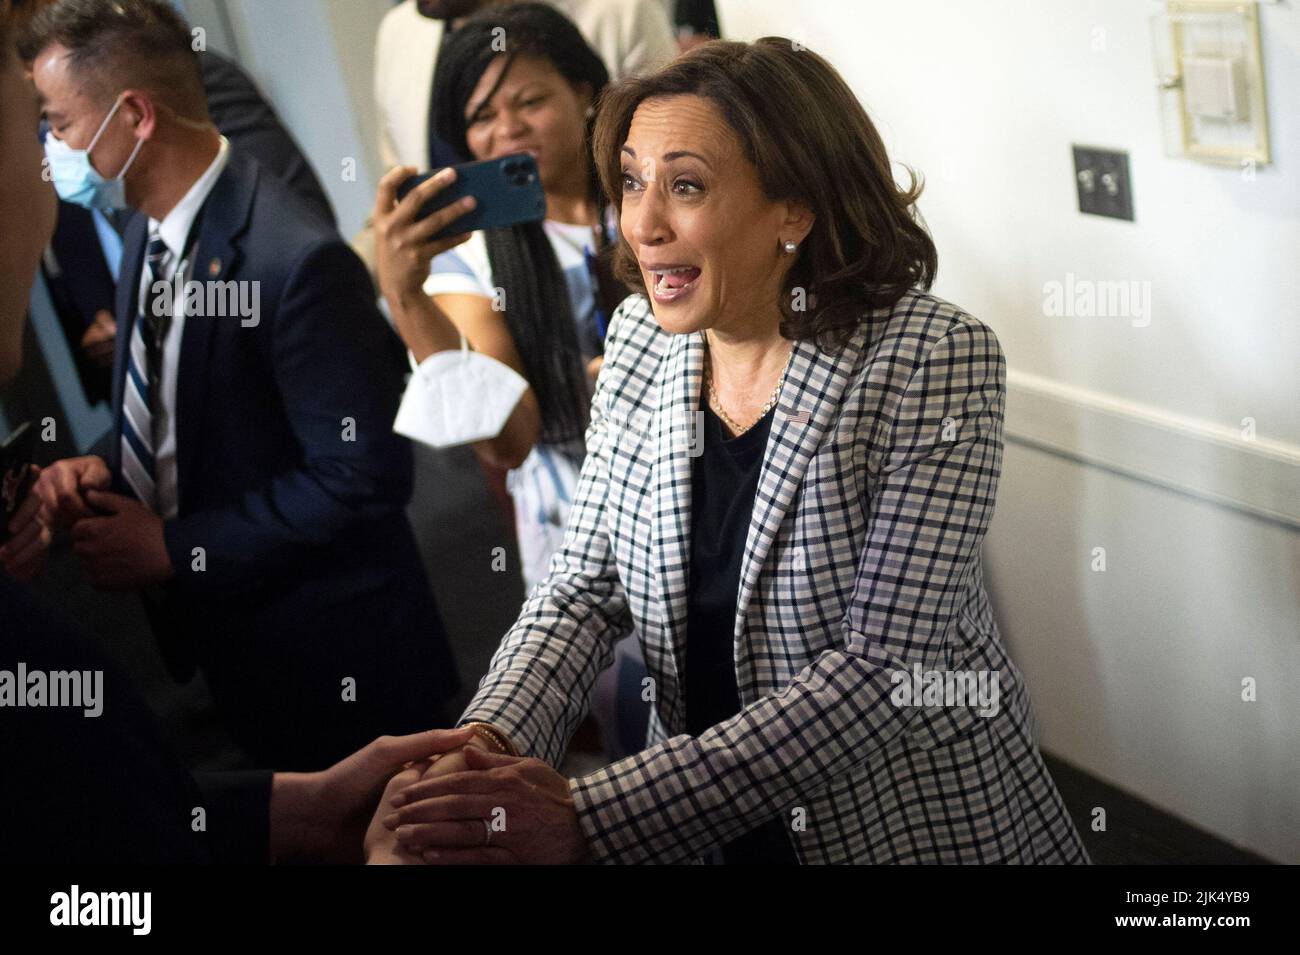 U.S. Vice President Kamala Harris meets with Democratic National Committee staff and volunteers after speaking to commemorate 100 days from the midterms on Saturday, July 30, 2022 in Washington, DC. (Photo by Bonnie Cash/Pool/ABACAPRESS.COM) Stock Photo